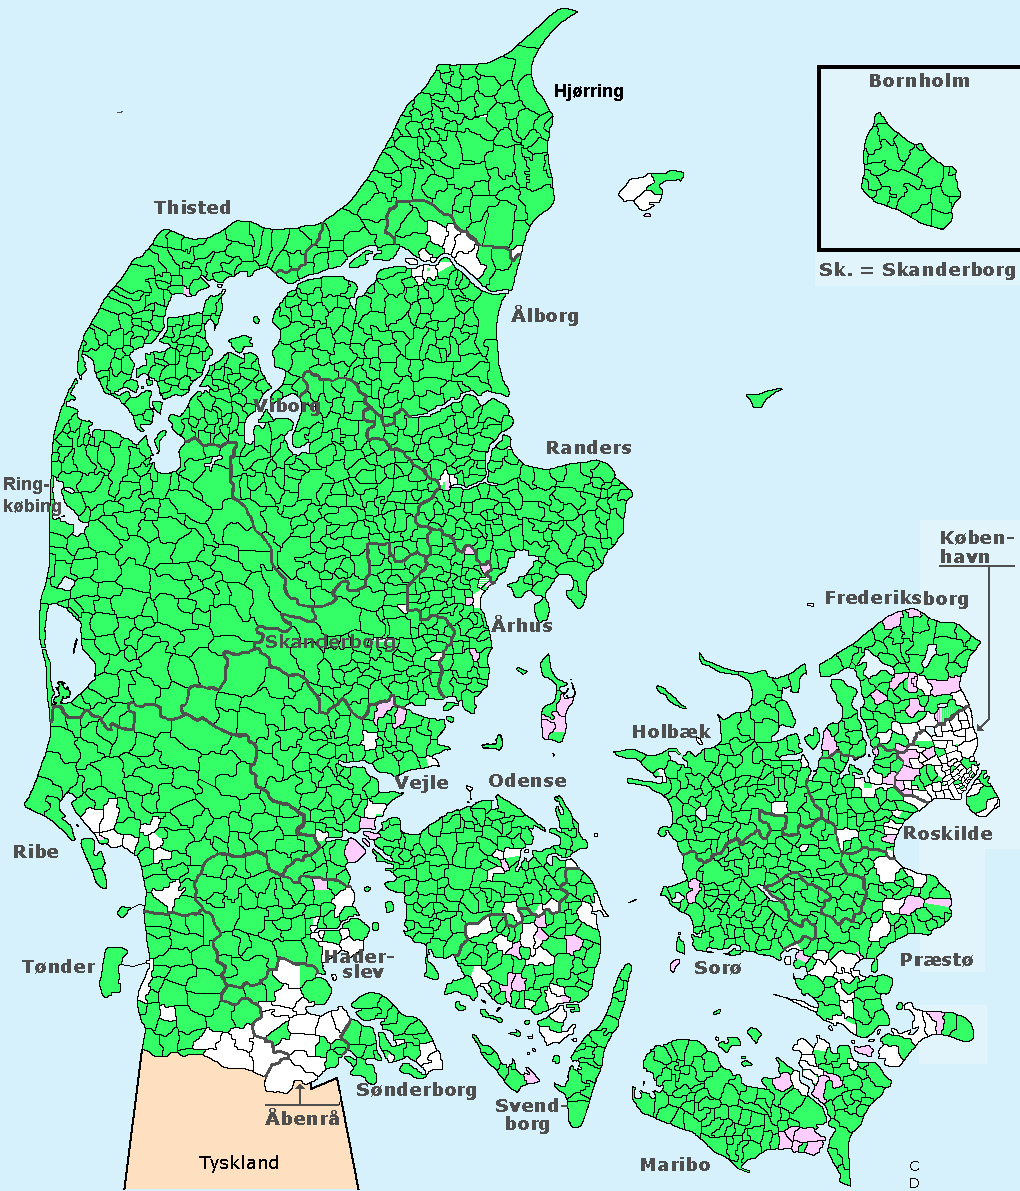 Map overview of photographed cemeteries in Denmark.